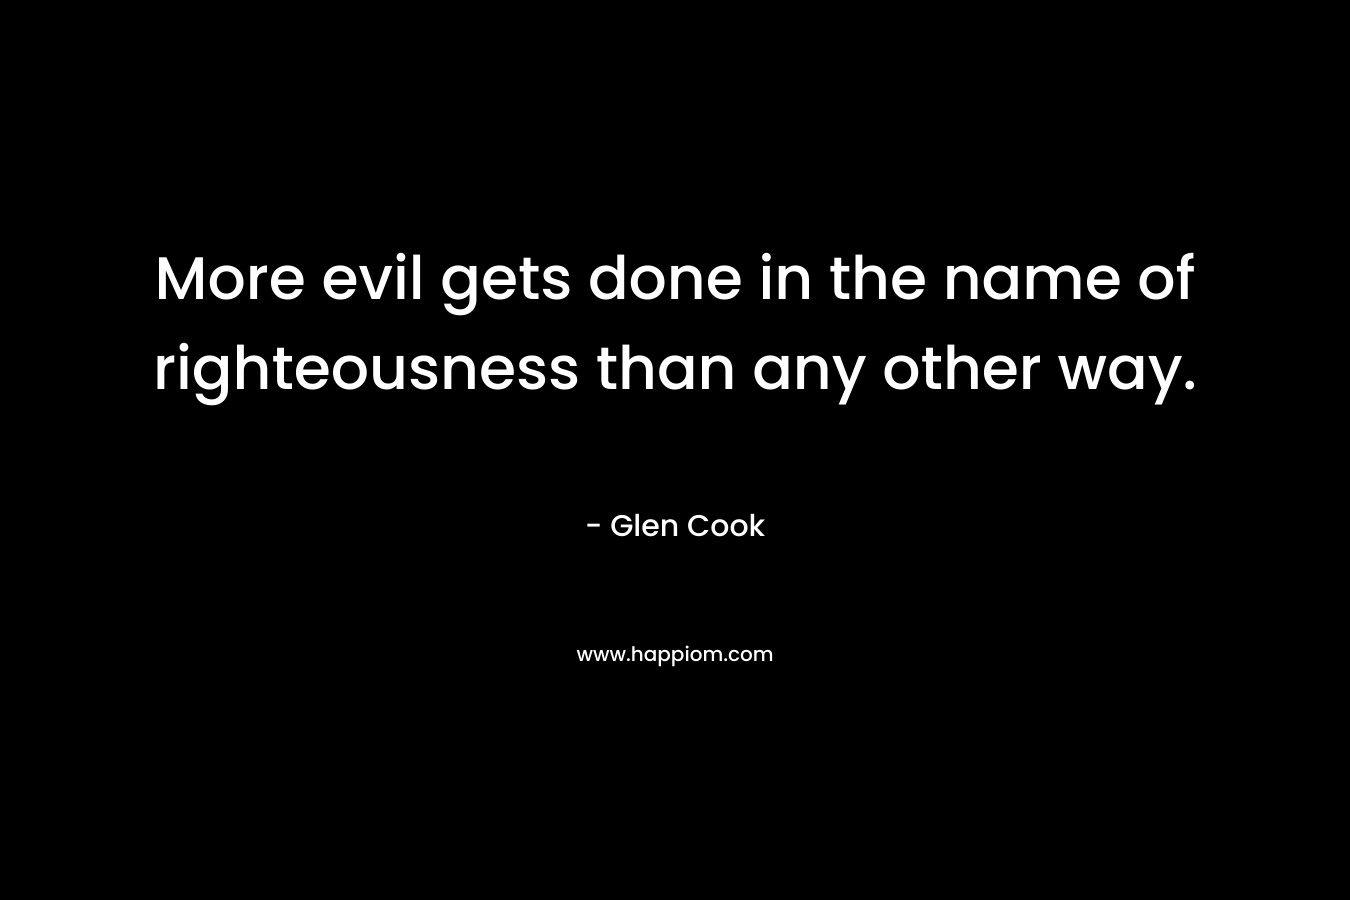 More evil gets done in the name of righteousness than any other way. – Glen Cook